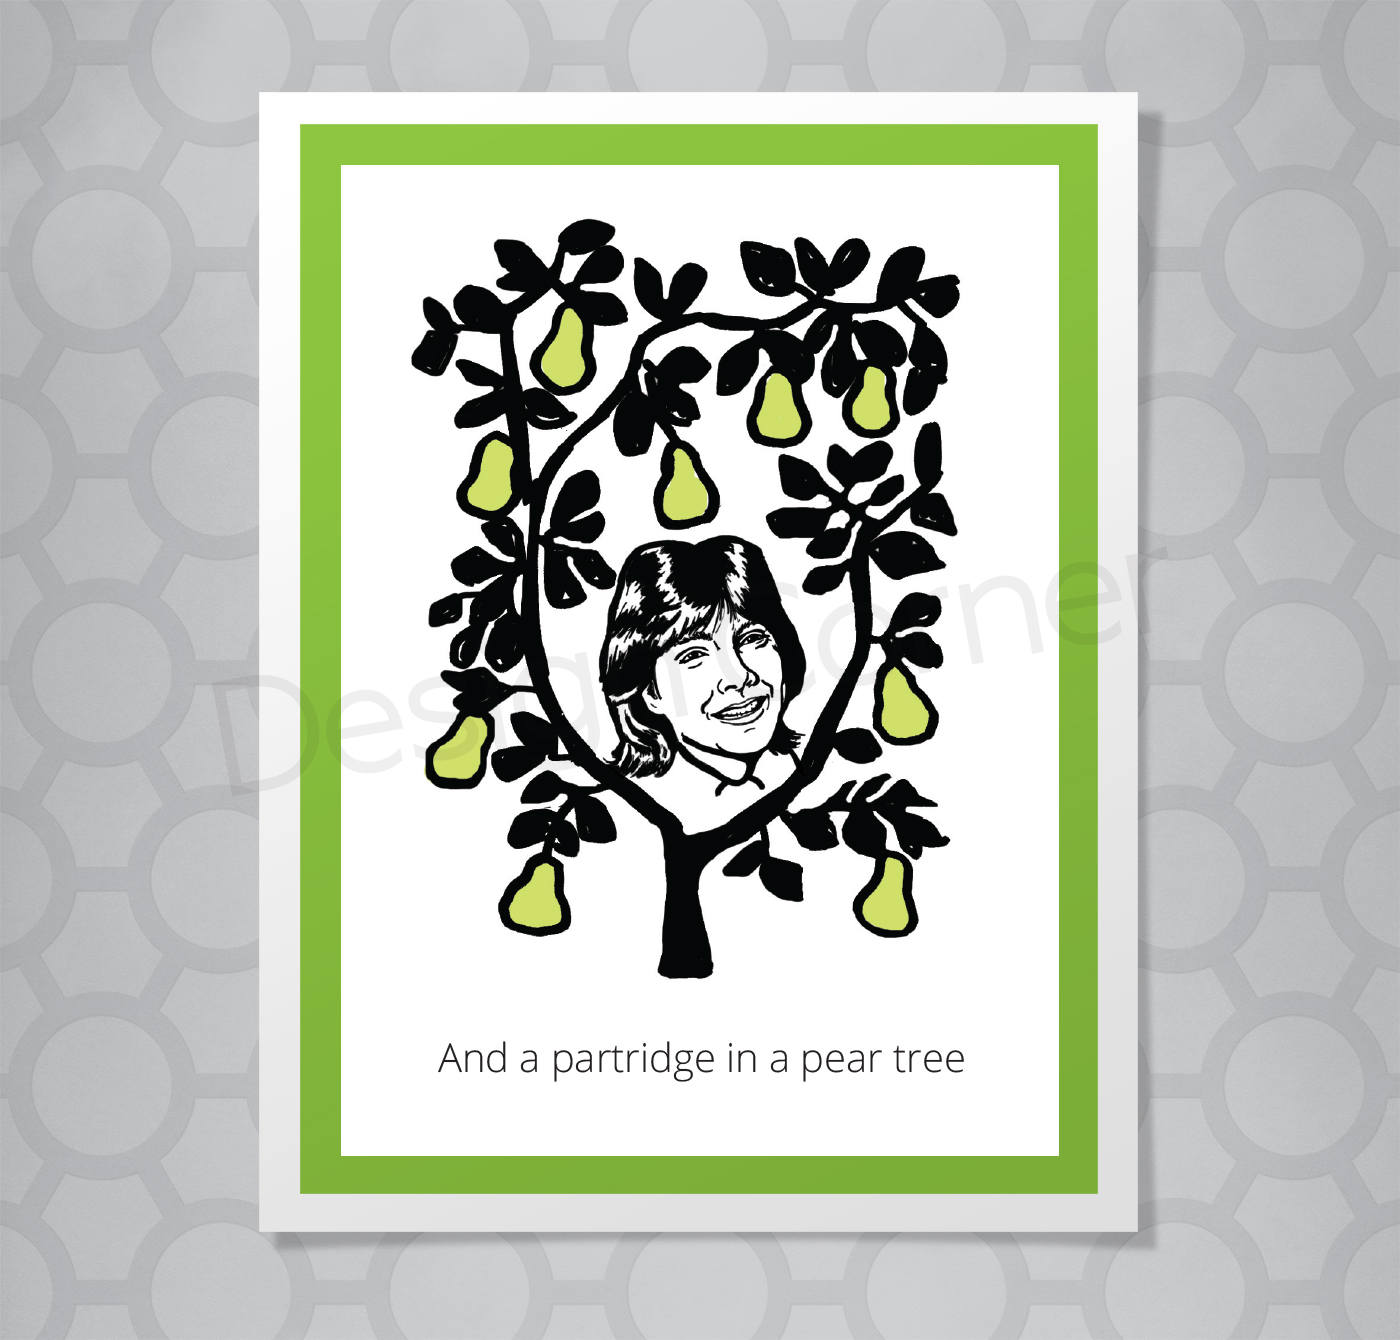 Illustration of pear tree with Danny Partridge head in the middle on a Christmas card